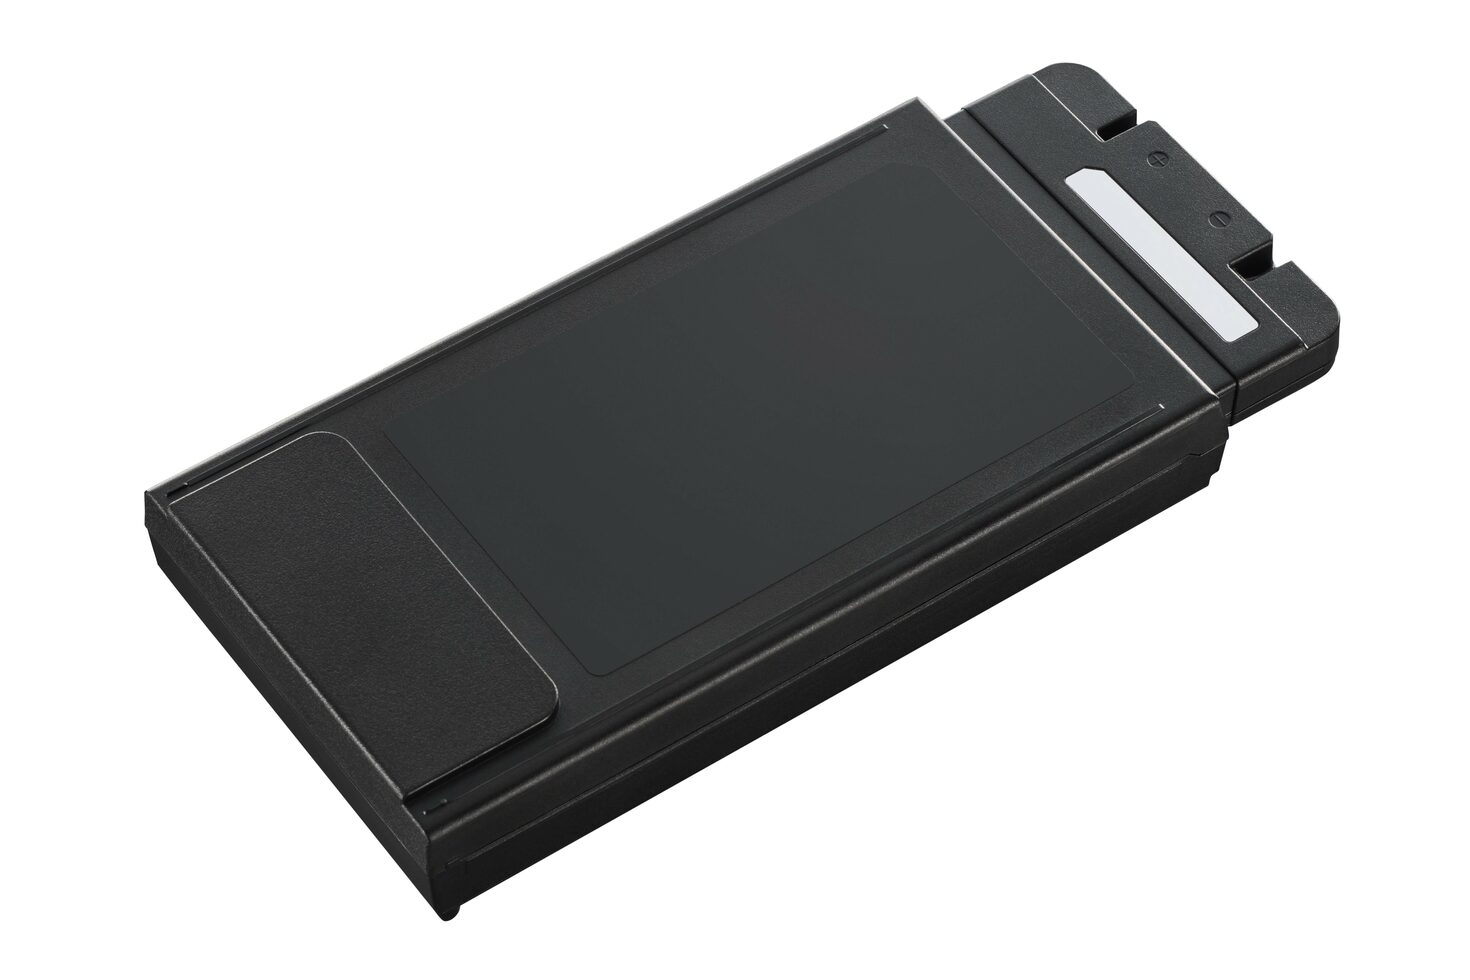 <span style="font-size: 12.6px;">TOUGHBOOK 55 Porduct Image Data</span>